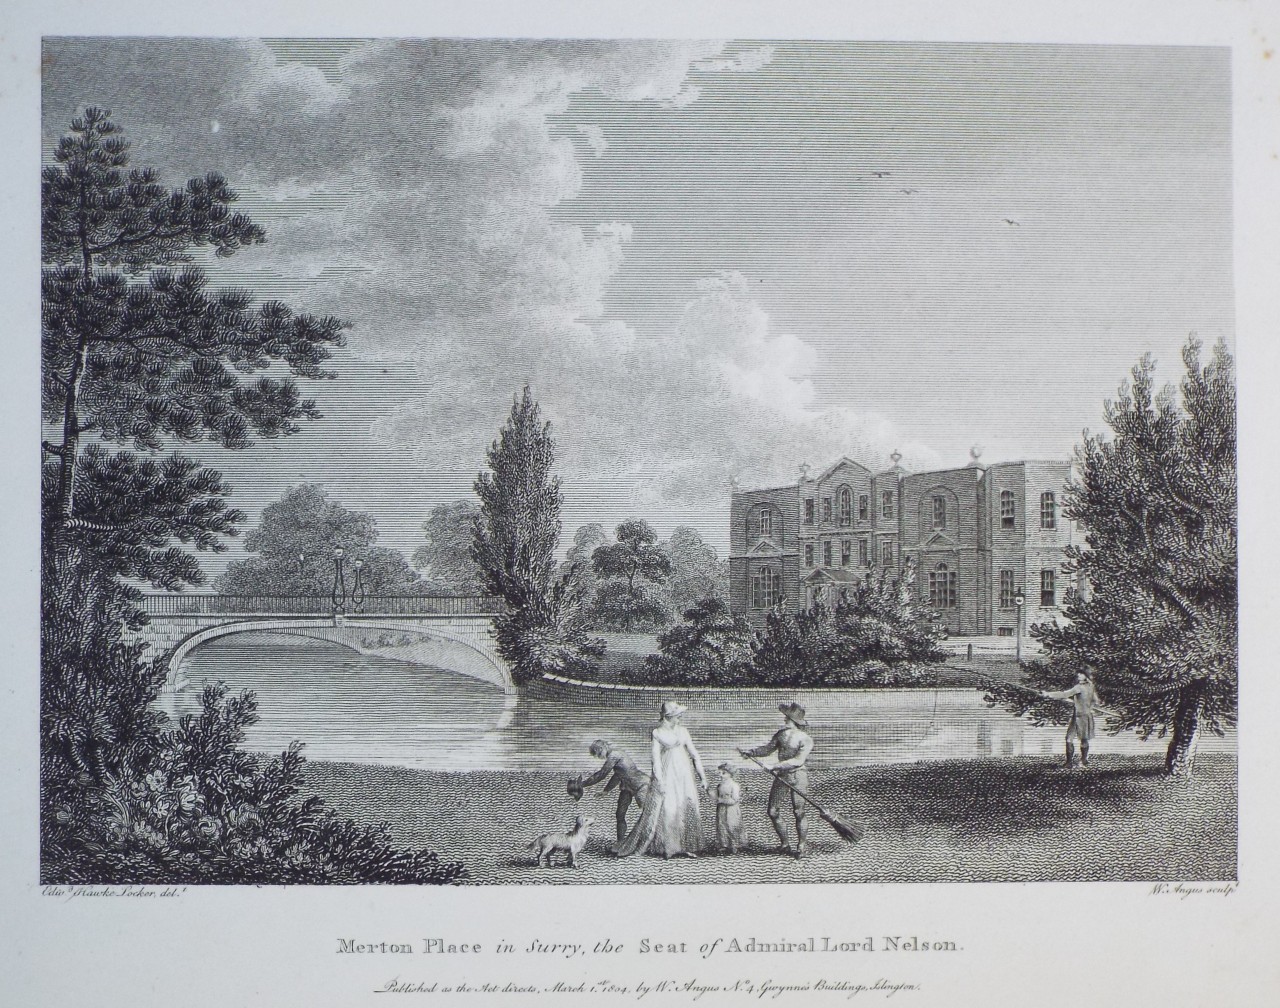 Print - Merton Place in Surry, the Seat of Admiral Lord Nelson. - Angus